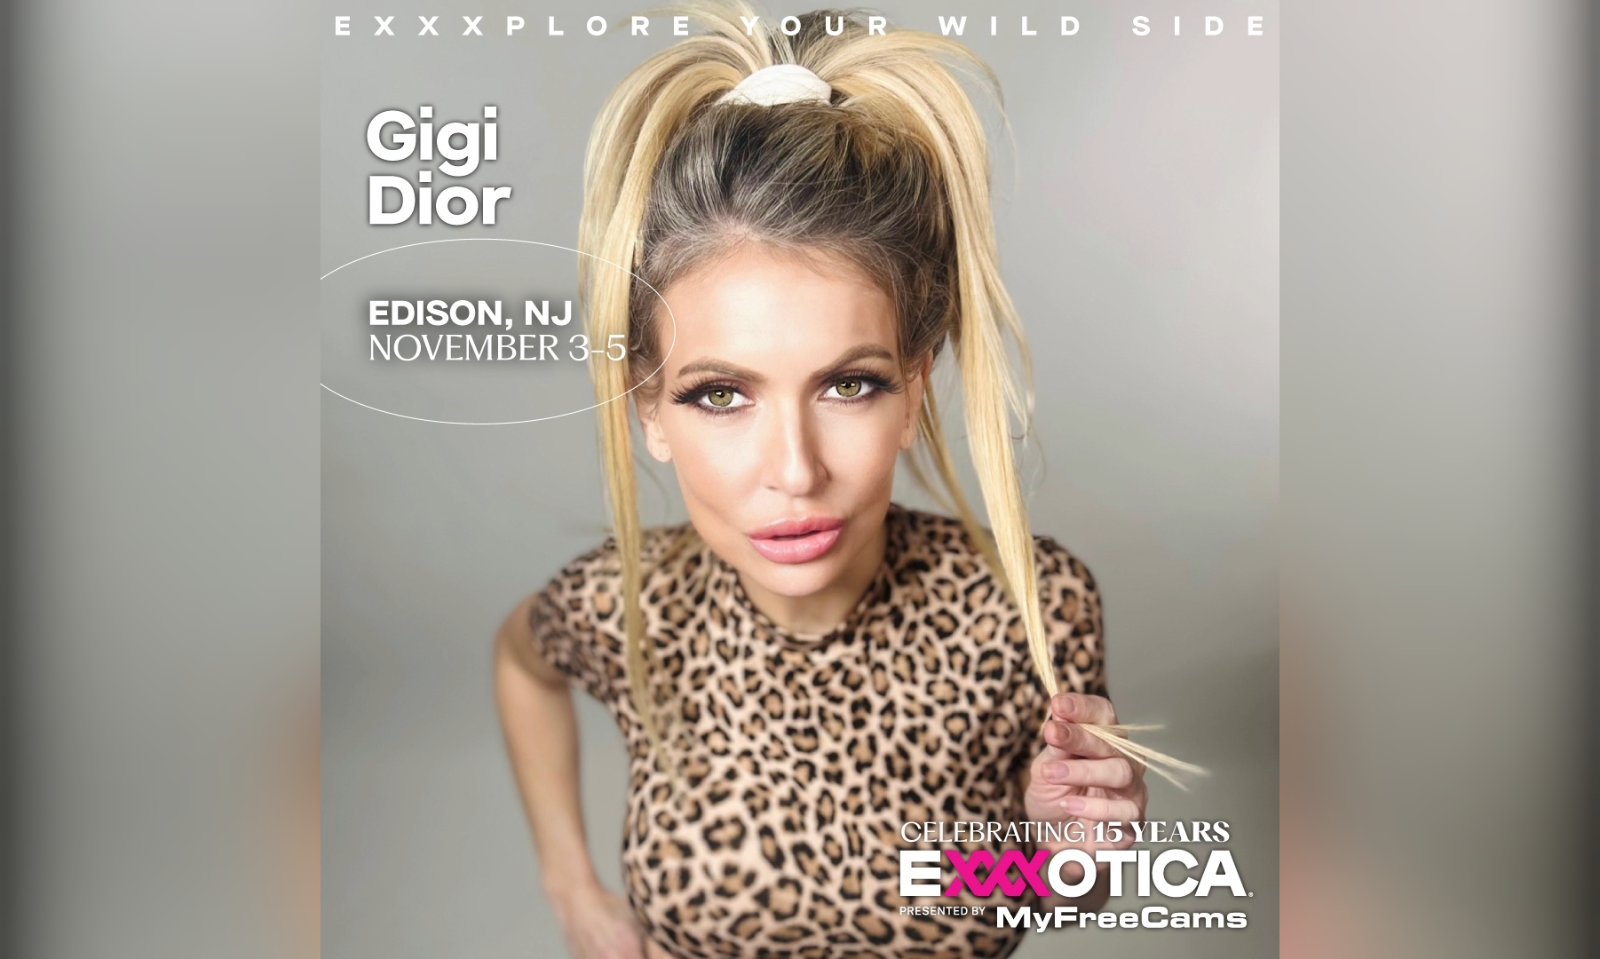 Gigi Dior to Appear at Planetary Studio for Exxxotica New Jersey